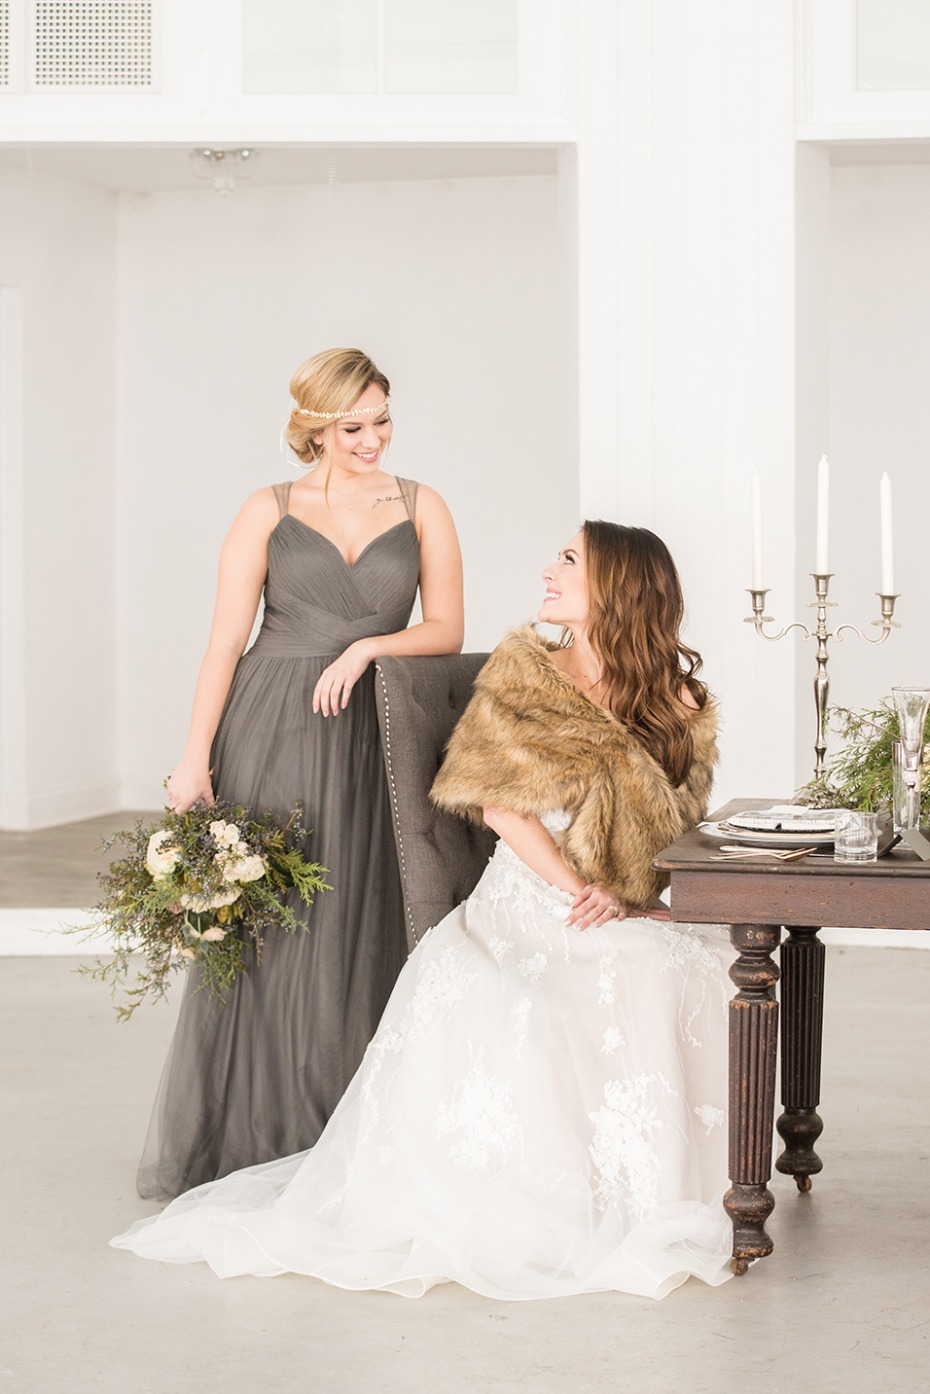 fur shall for the bride and elegant grey dress for the bridesmaid